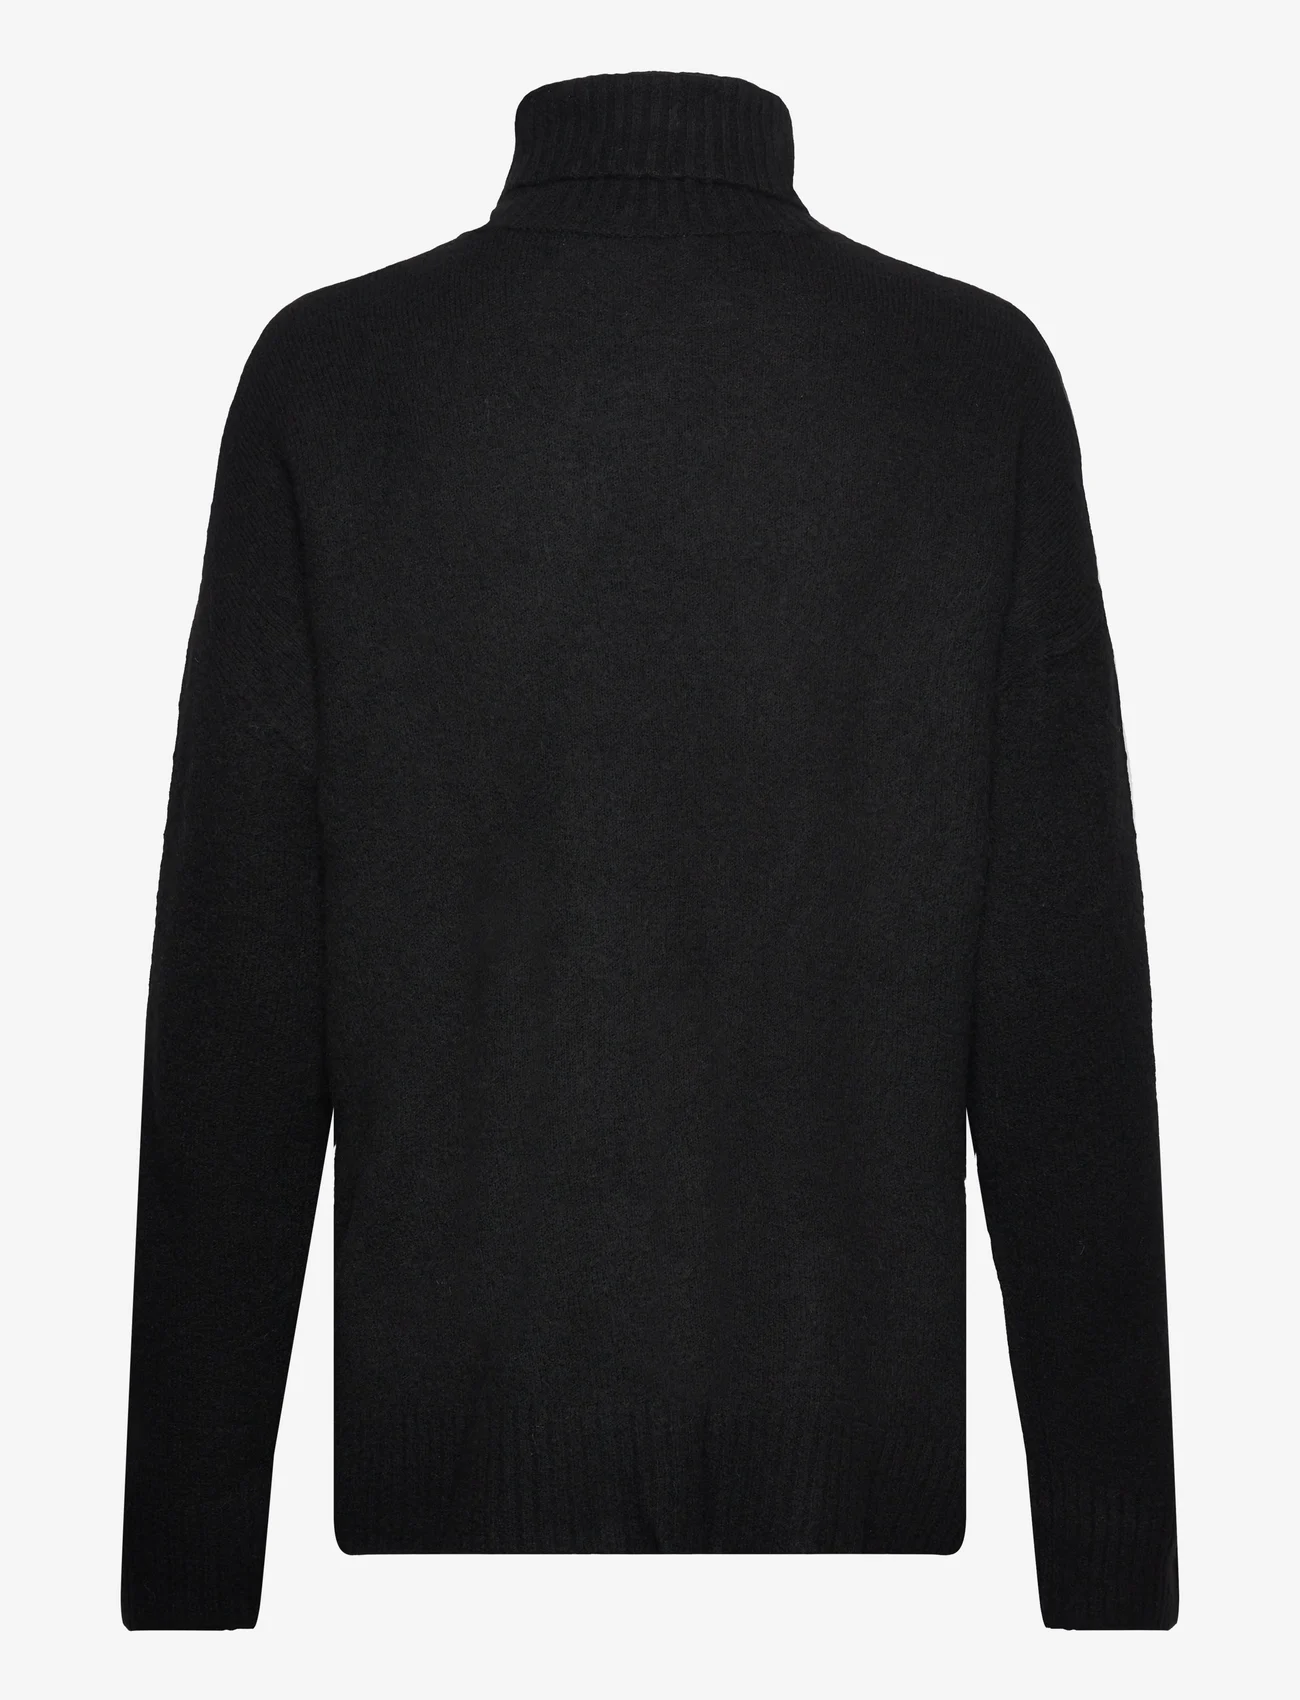 A-View - Penny roll neck pullover - pologenser - black - 1